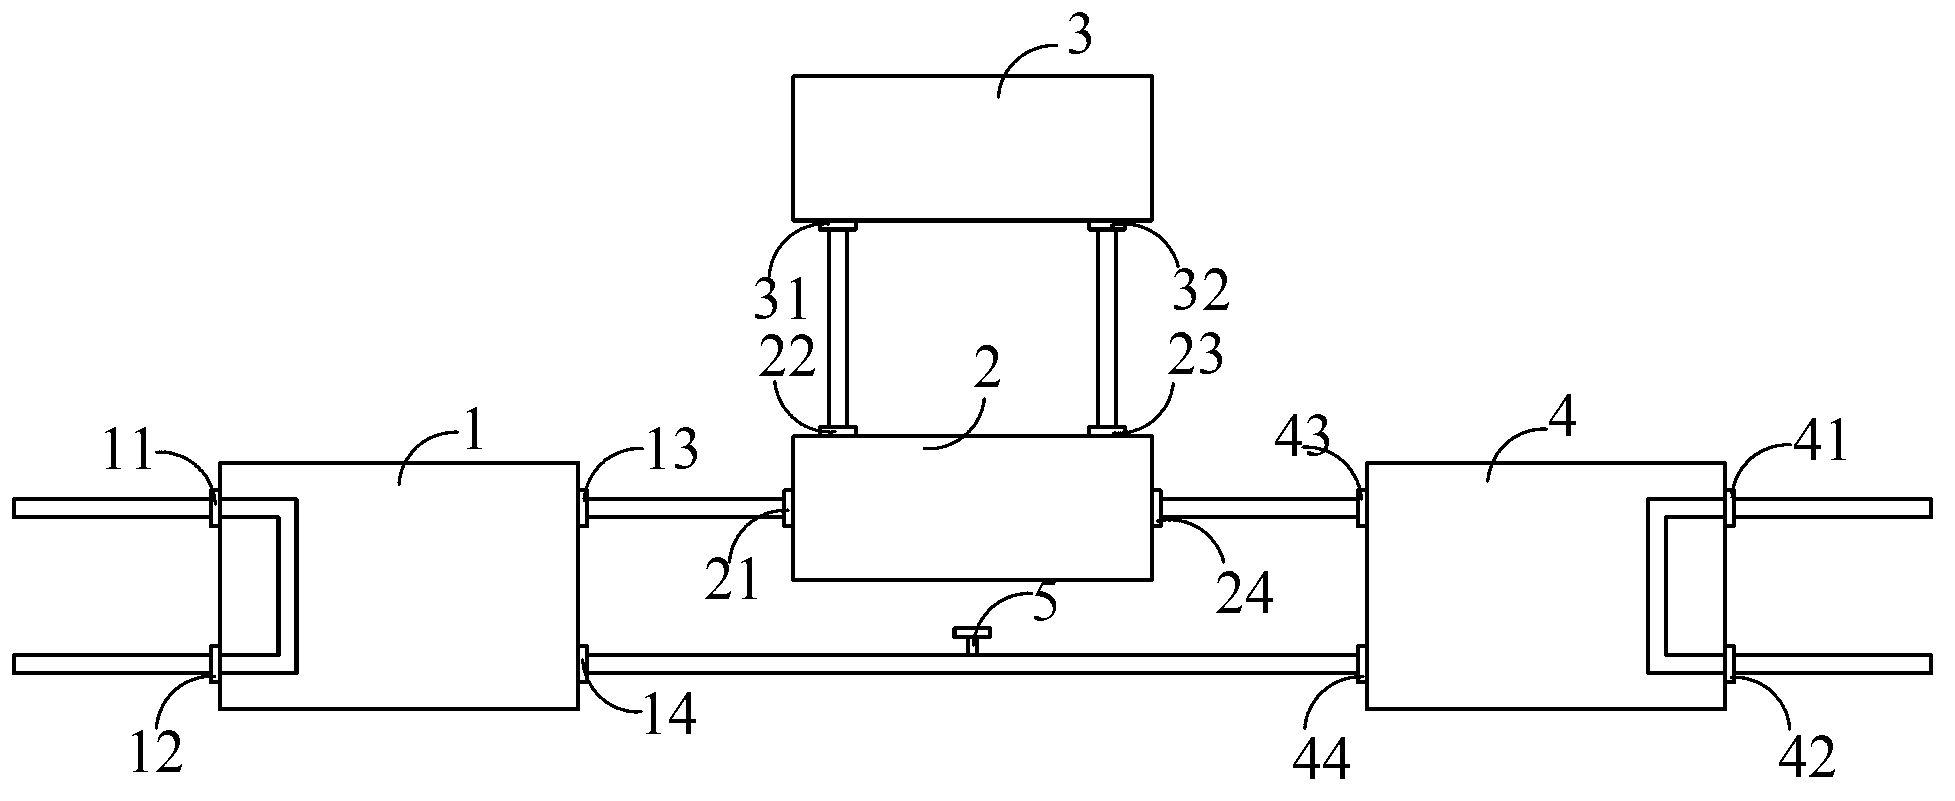 Combined-driven metal hydride heat pump system and method